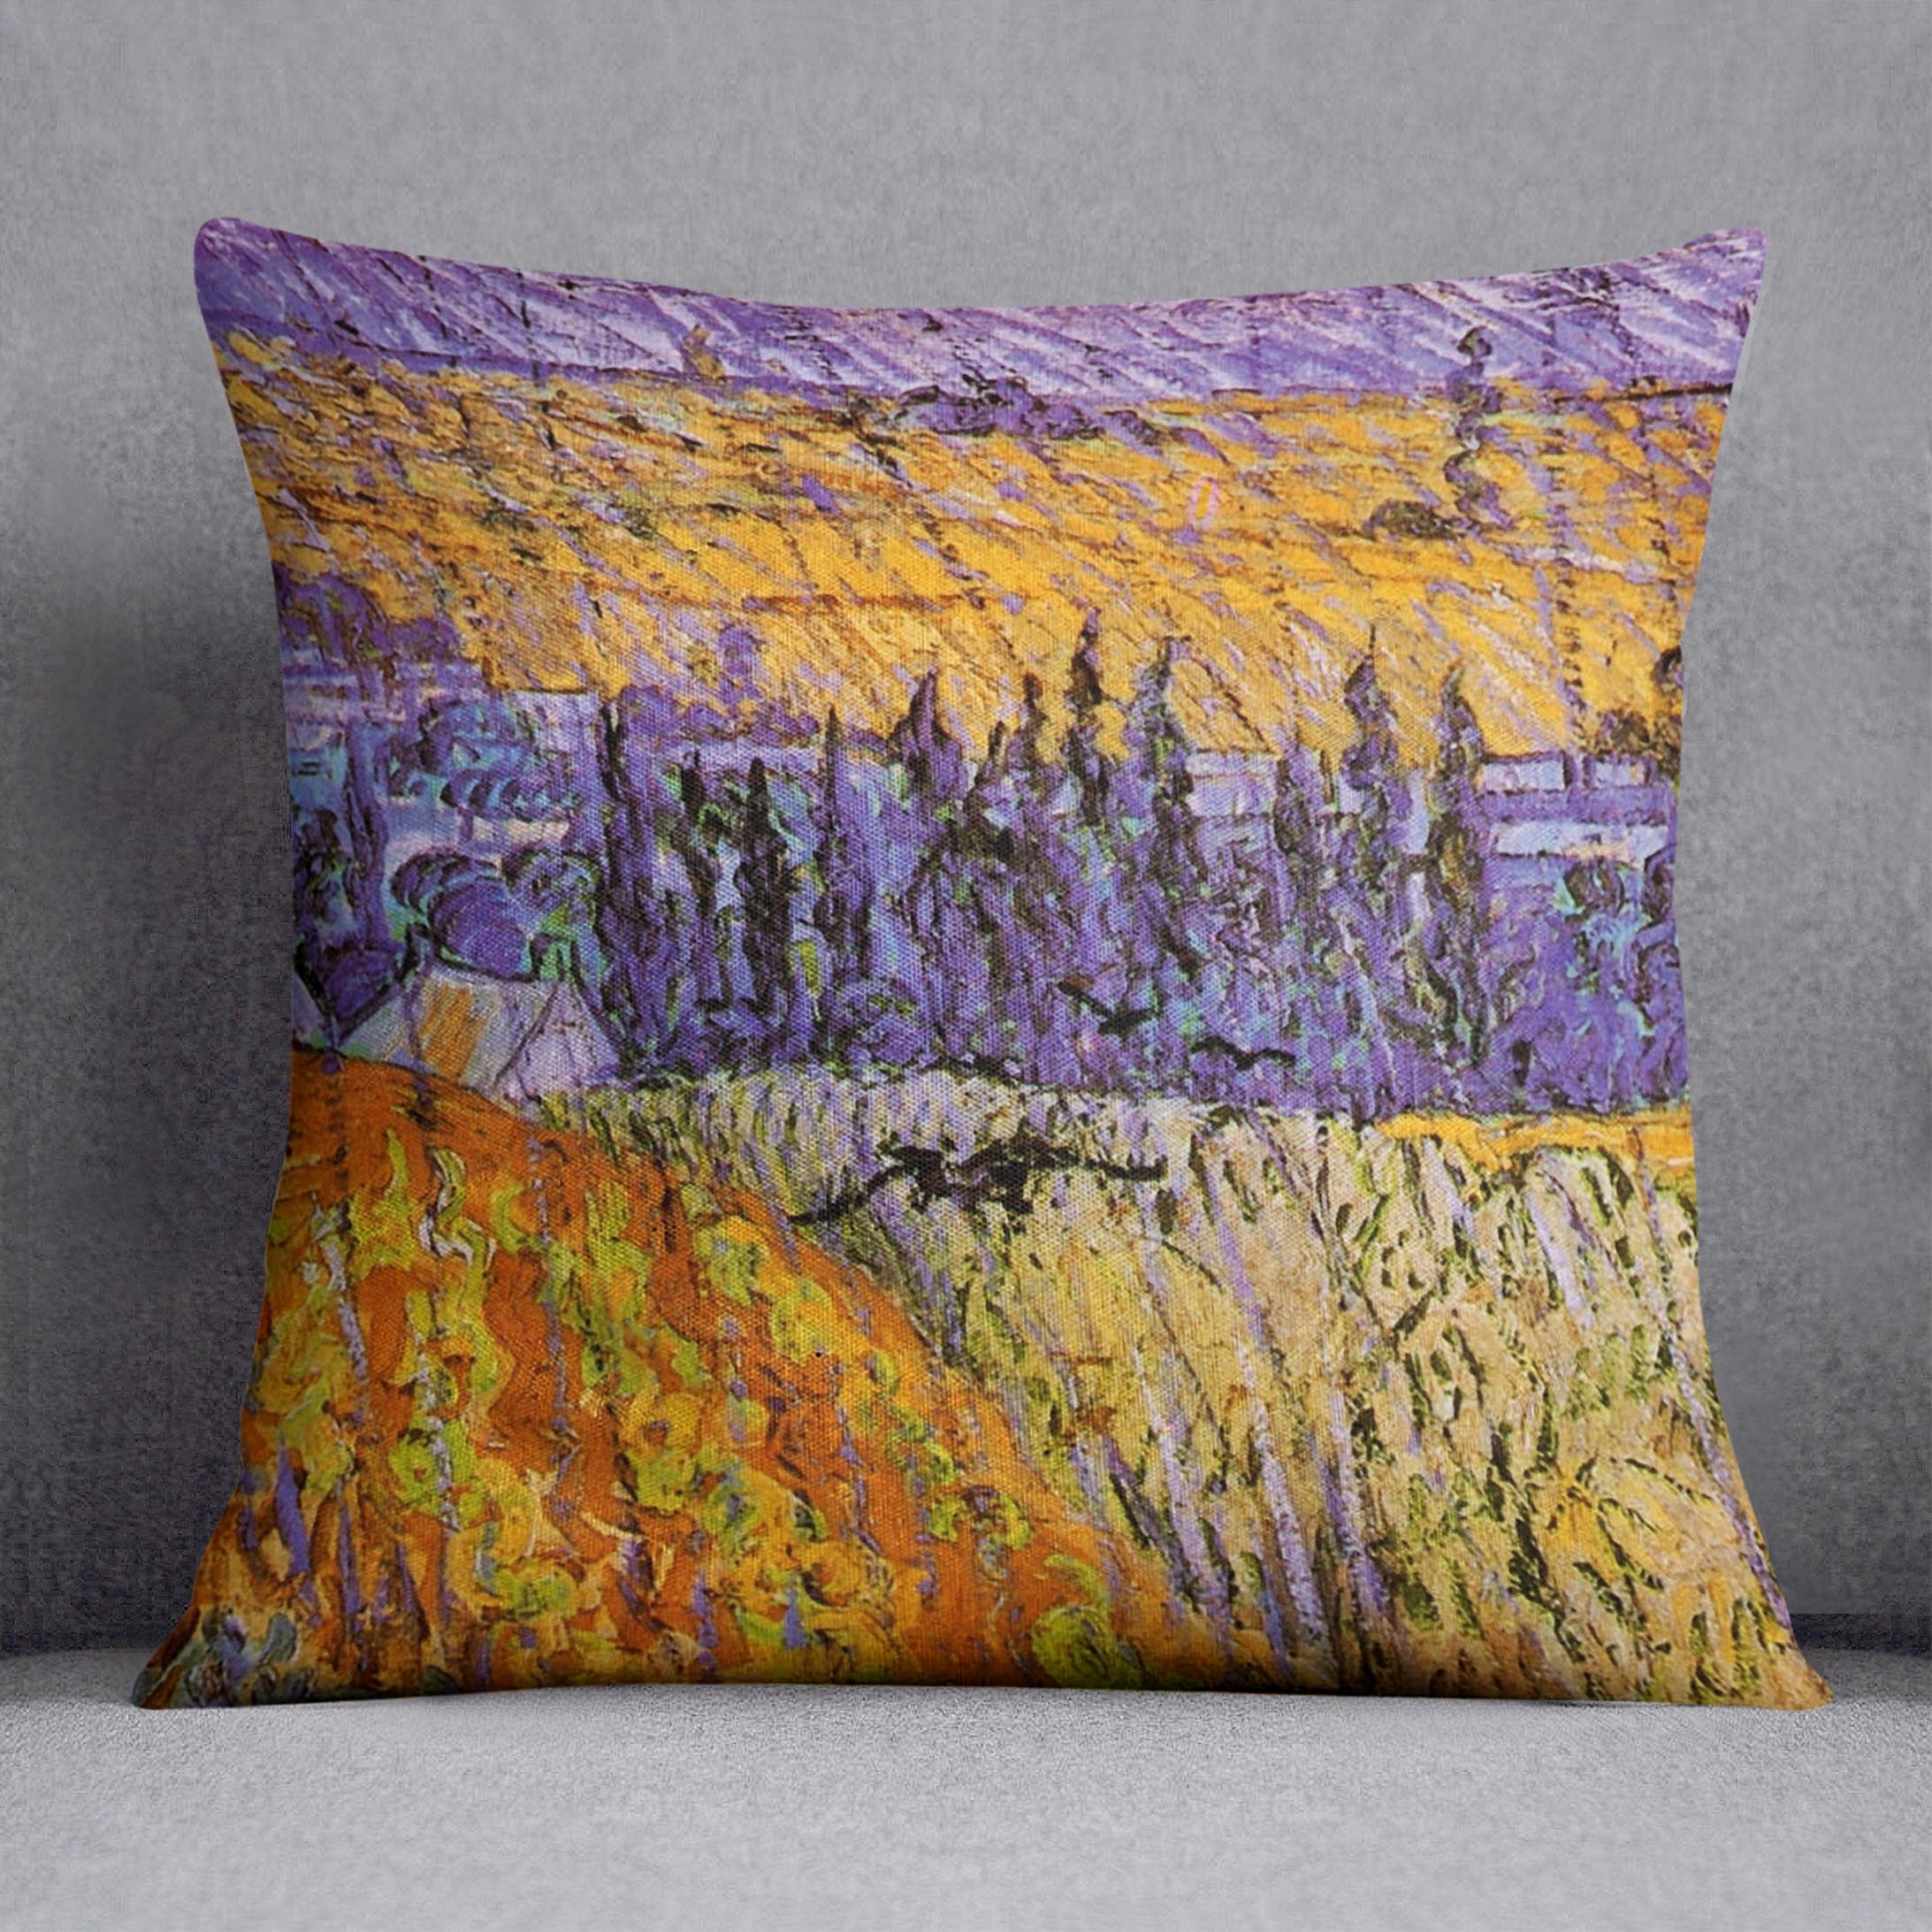 Landscape at Auvers in the Rain by Van Gogh Cushion